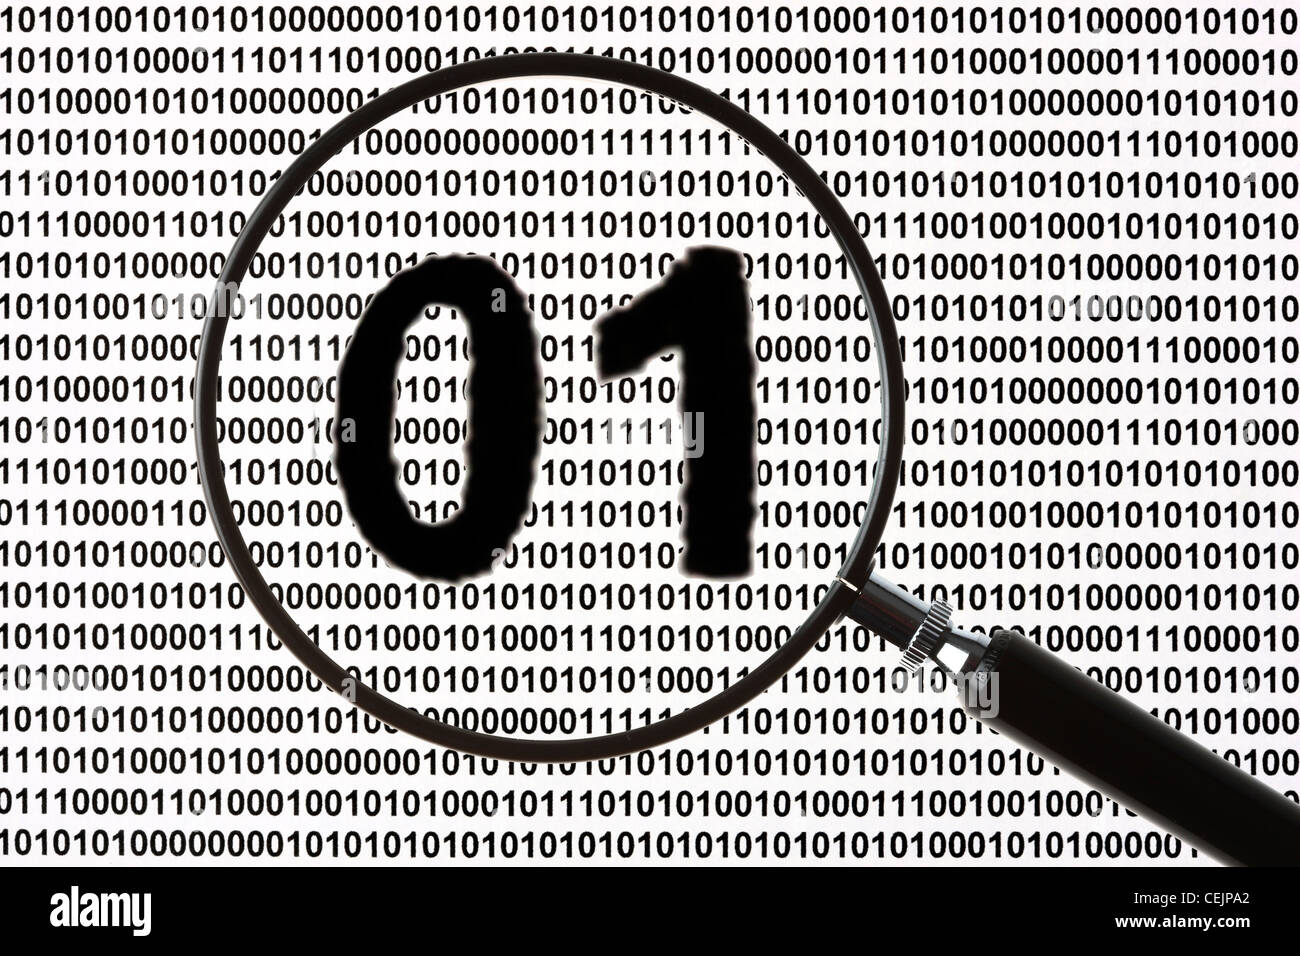 Magnifying glass highlighting a zero and one number letter, sign,  symbol for digital, digitization . Symbolic image. Stock Photo